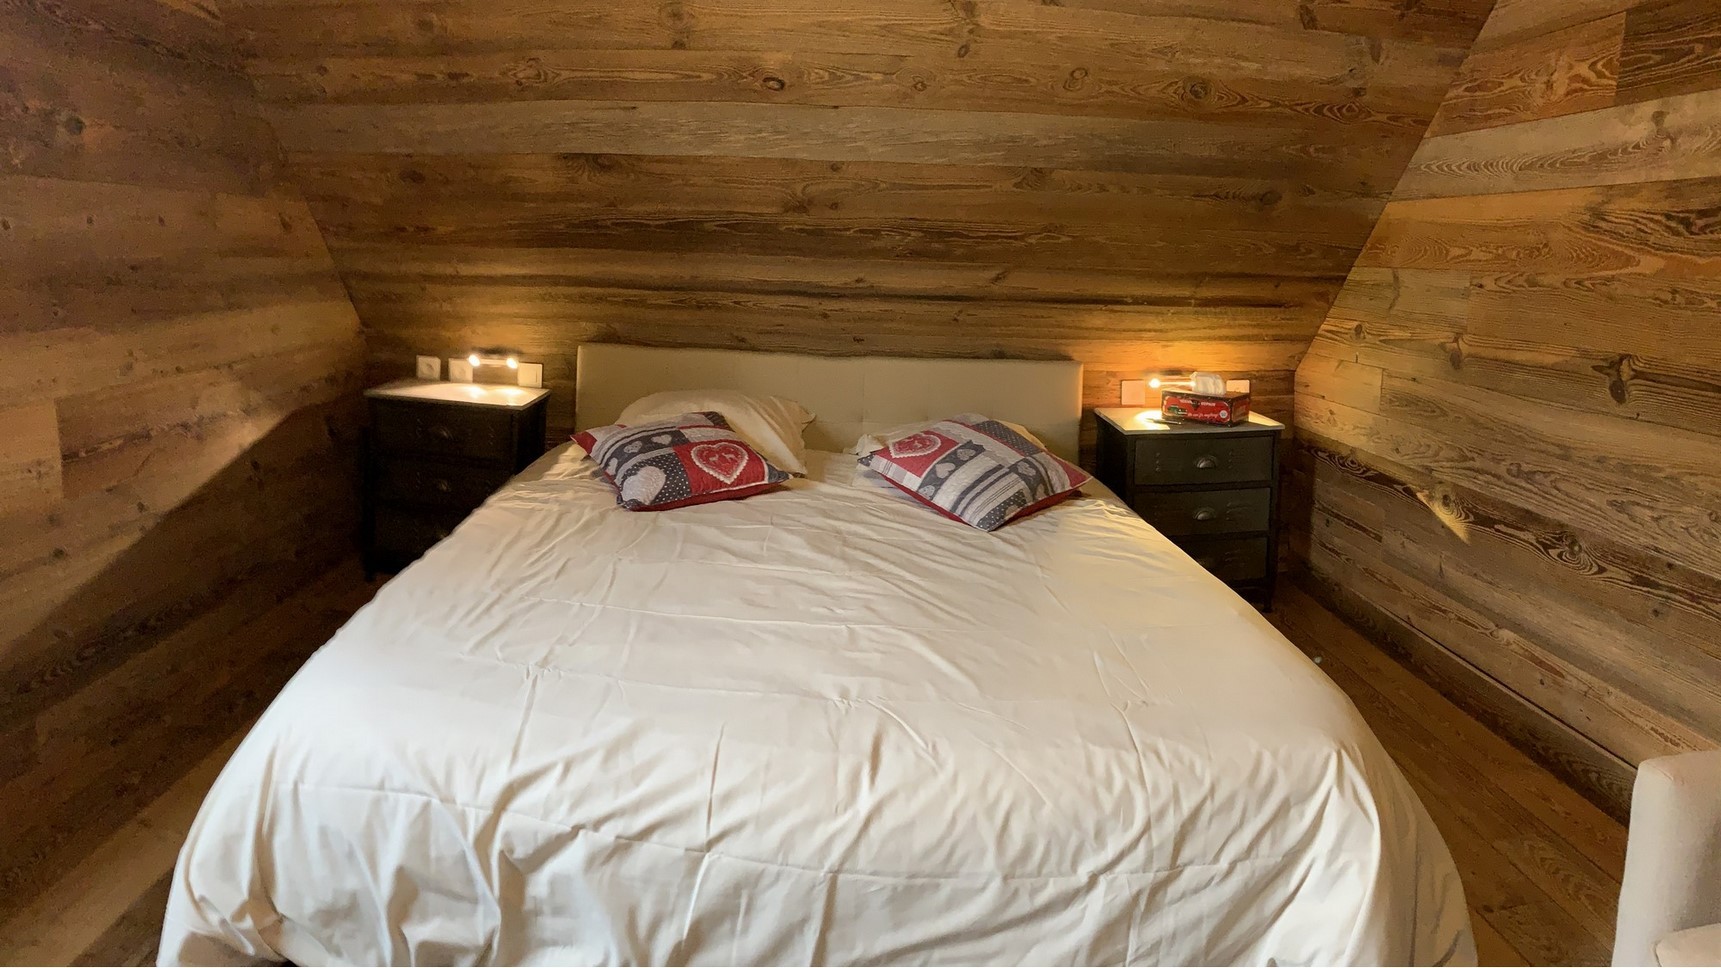 Super Besse chalet, Anorak chalet, Tyrolean room, the bed